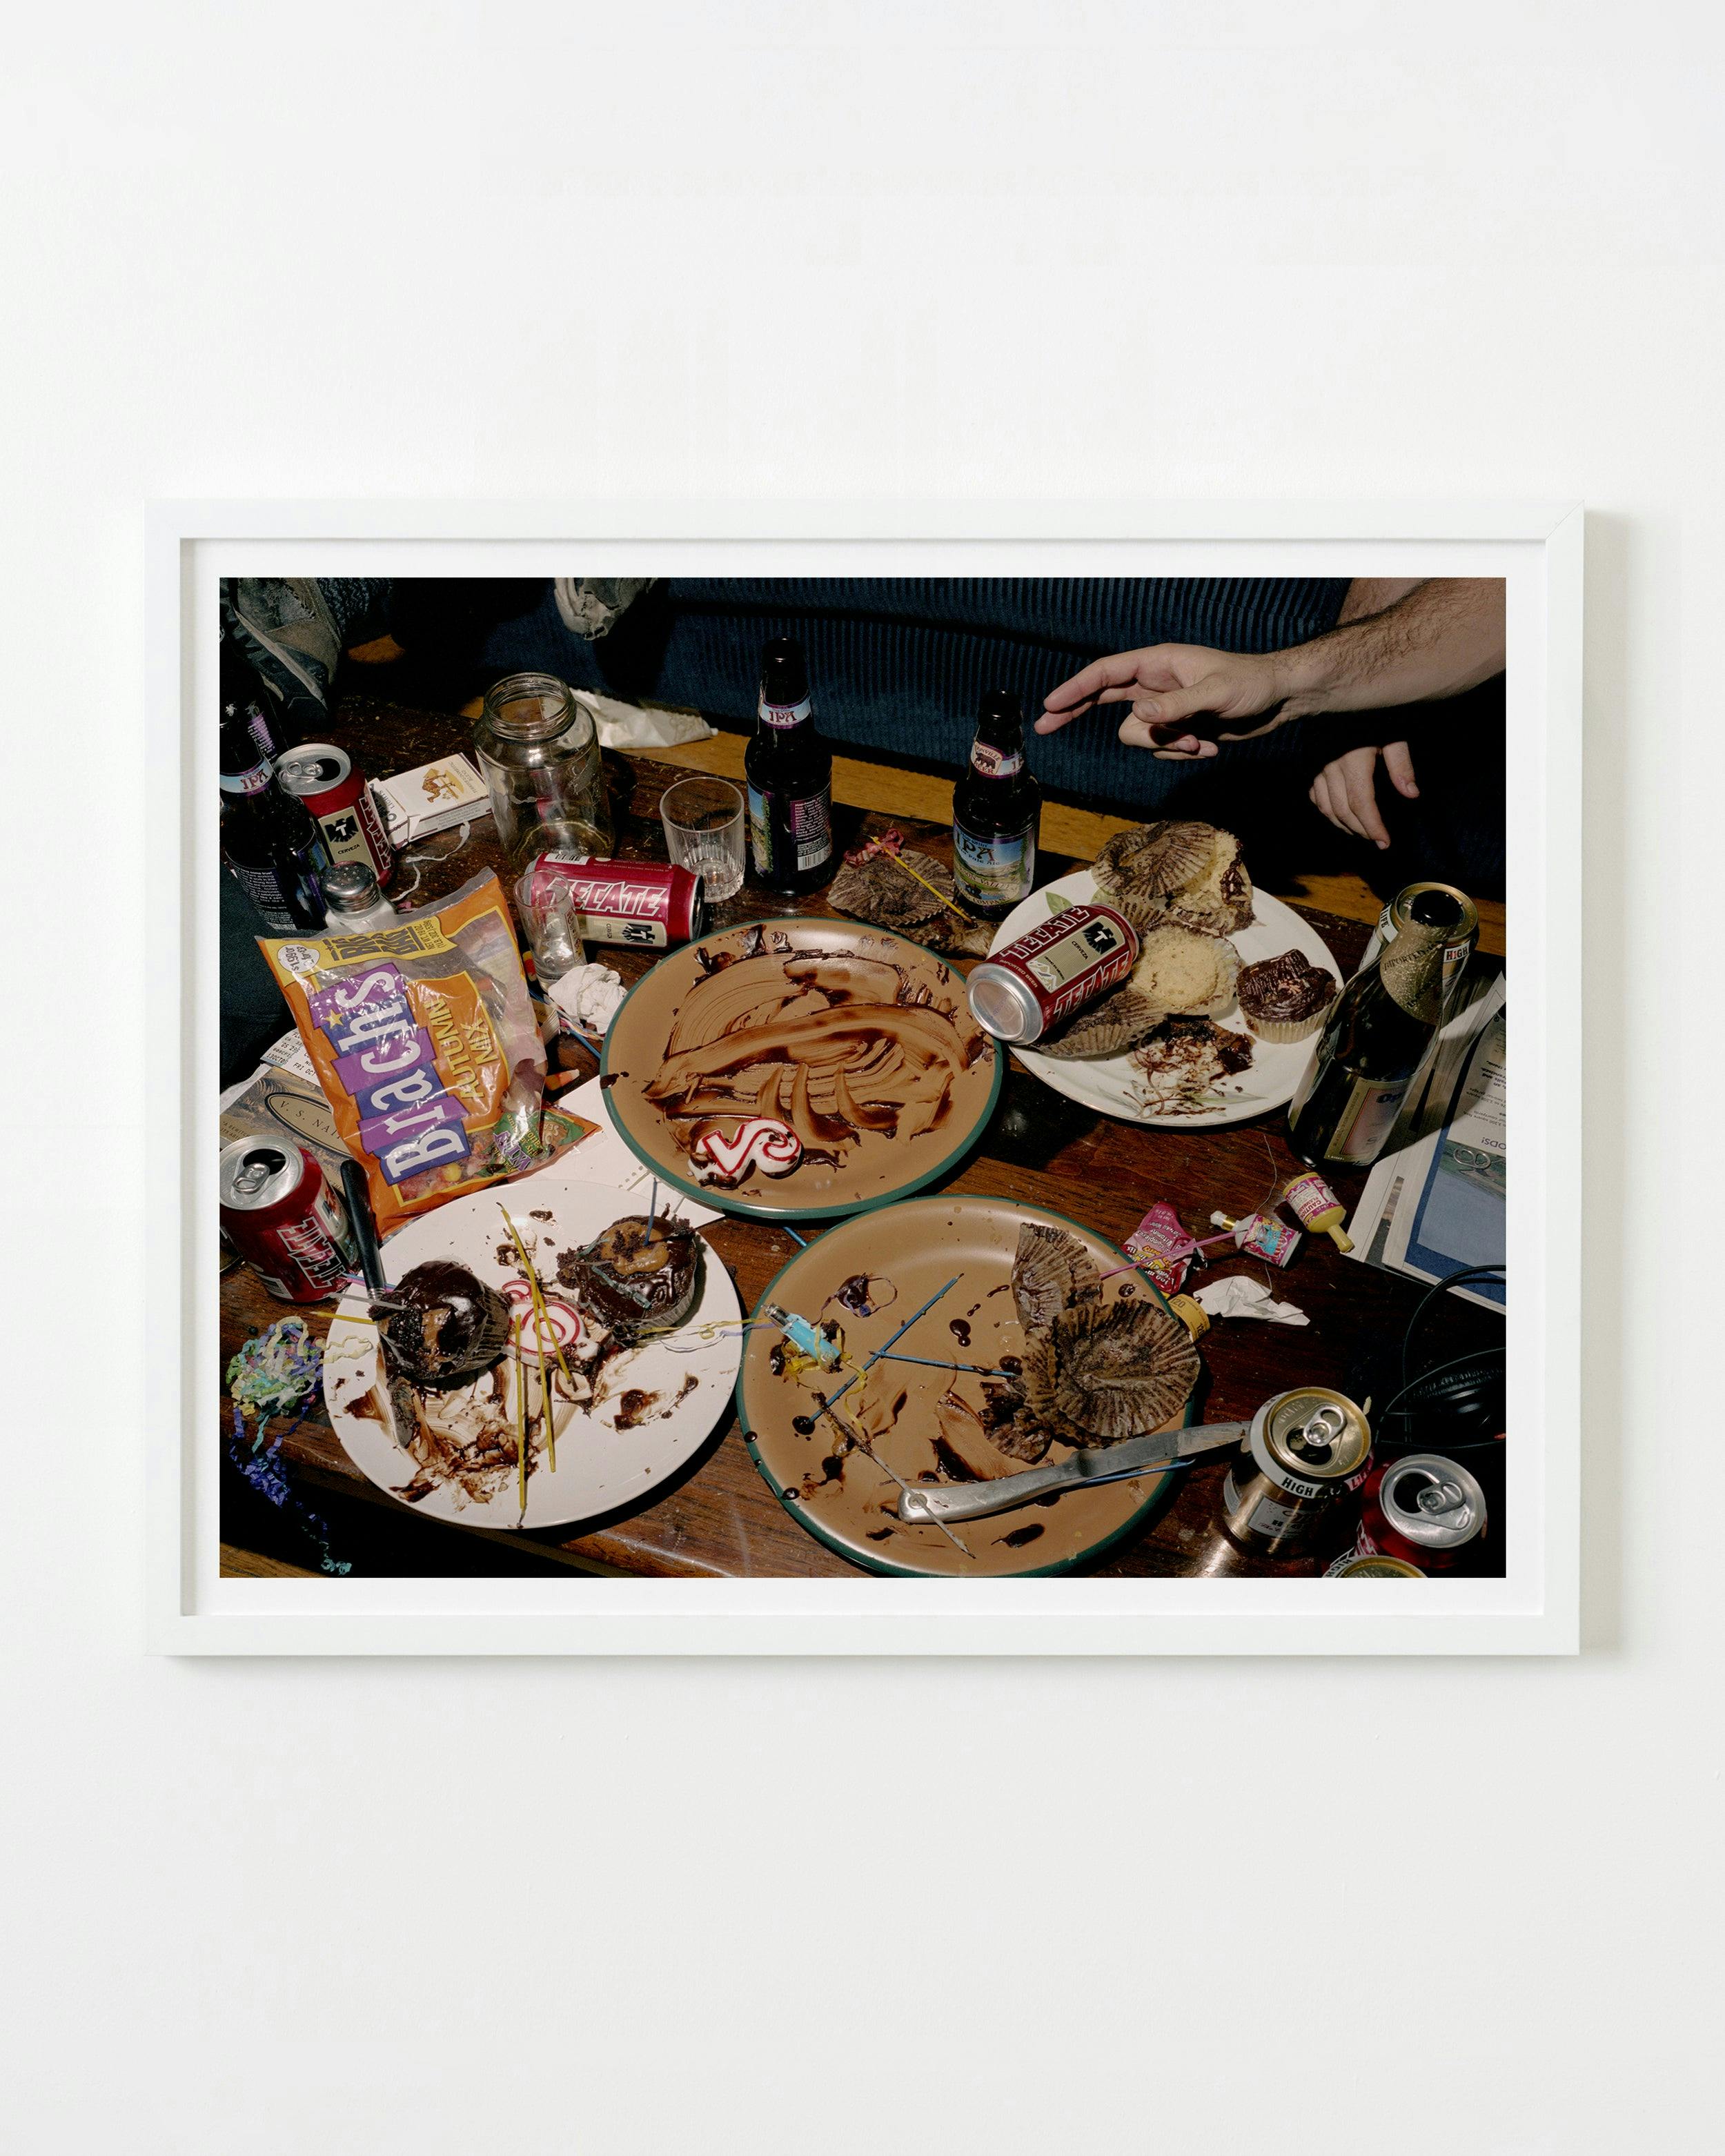 Photography by Nick Meyer titled "After the Party".